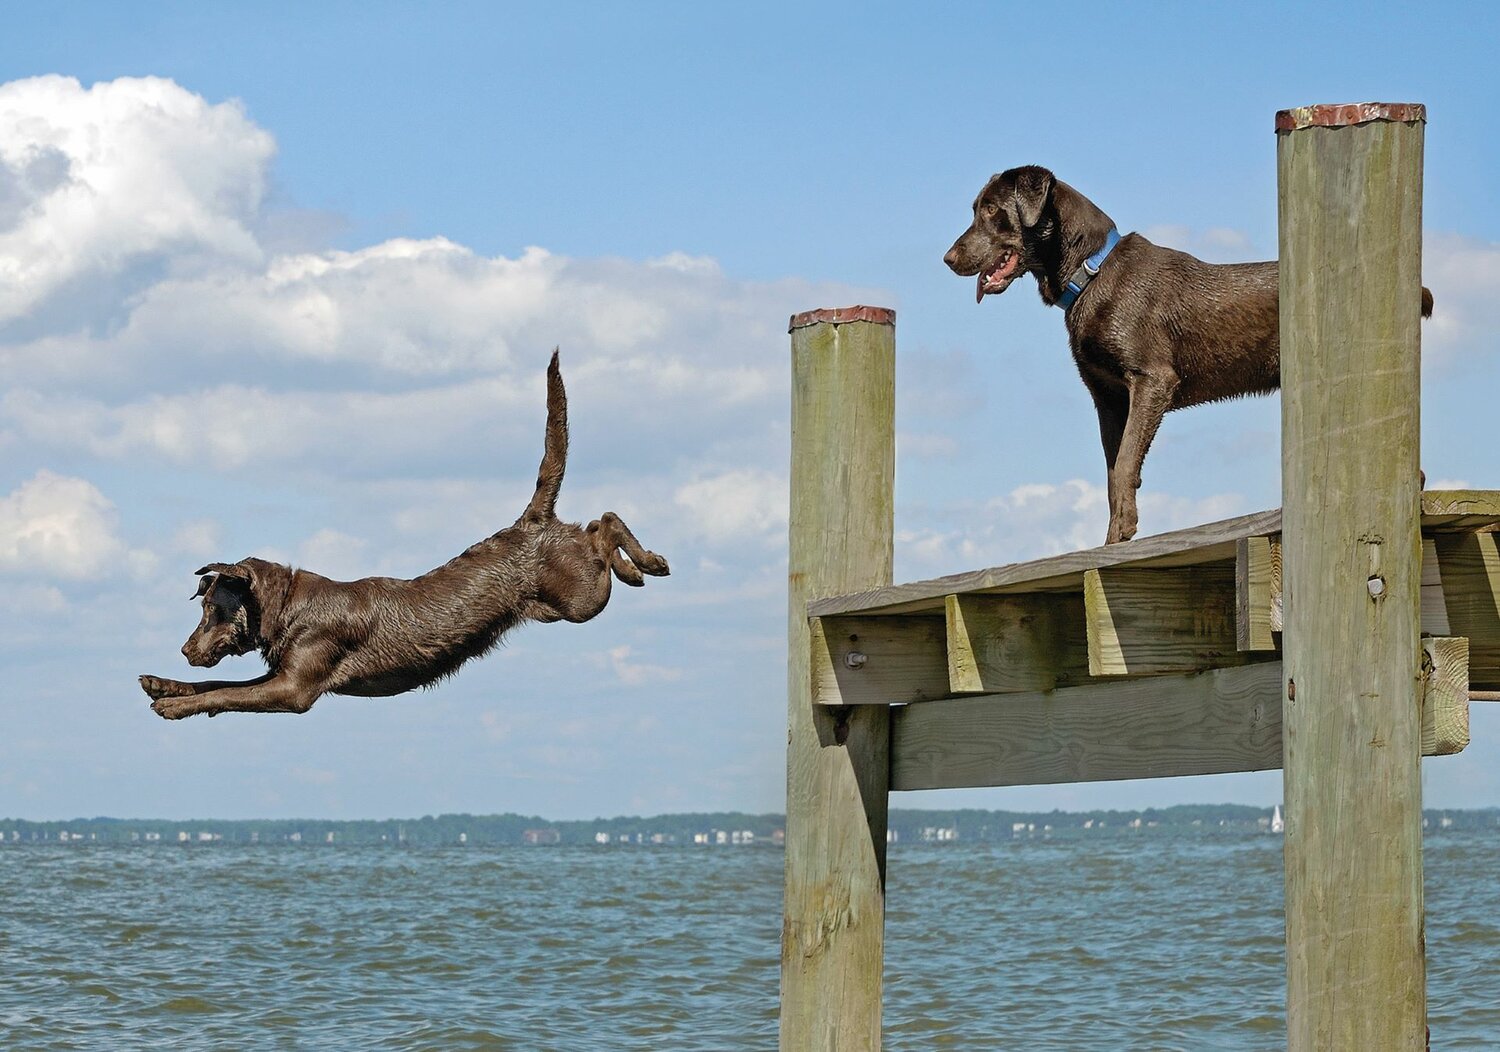 Two chocolate Labradors launched into the bay one summer day in Kent Island.